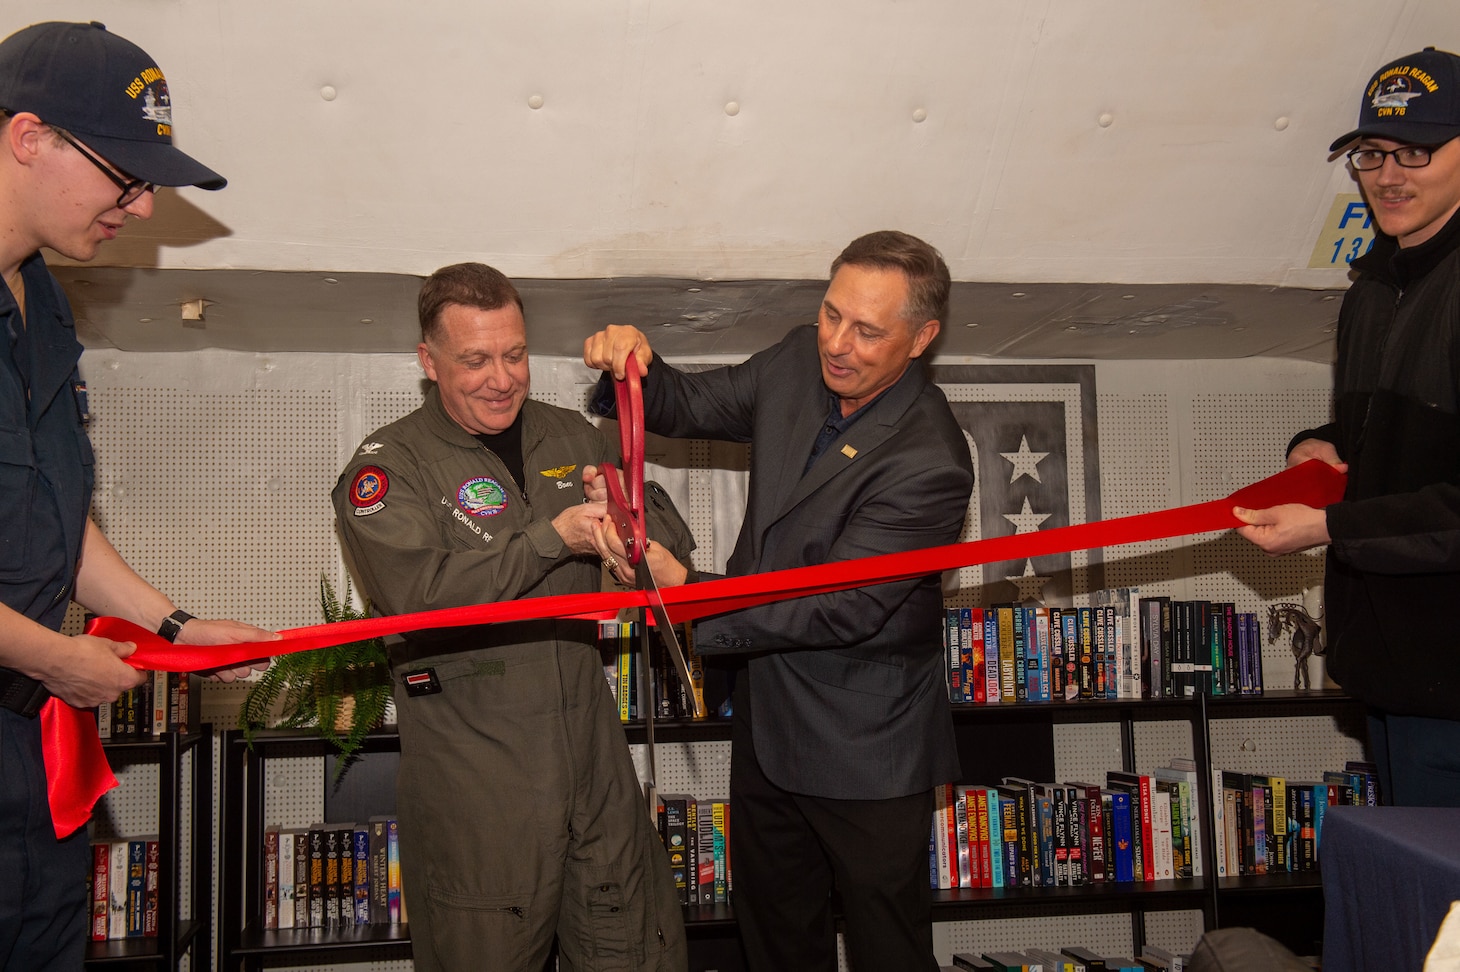 Capt. Daryle Cardone, commanding officer of the U.S. Navy’s only forward-deployed aircraft carrier, USS Ronald Reagan (CVN 76), and Scott Maskery, regional vice president for the United Service Operations (USO) Indo-Pacific regional office, cut a ribbon to signify the opening of a ship-based USO center aboard the ship while in-port Commander, Fleet Activities Yokosuka, April 17. Ronald Reagan, the flagship of Carrier Strike Group 5, provides a combat-ready force that protects and defends the United States, and supports alliances, partnerships and collective maritime interests in the Indo-Pacific region.